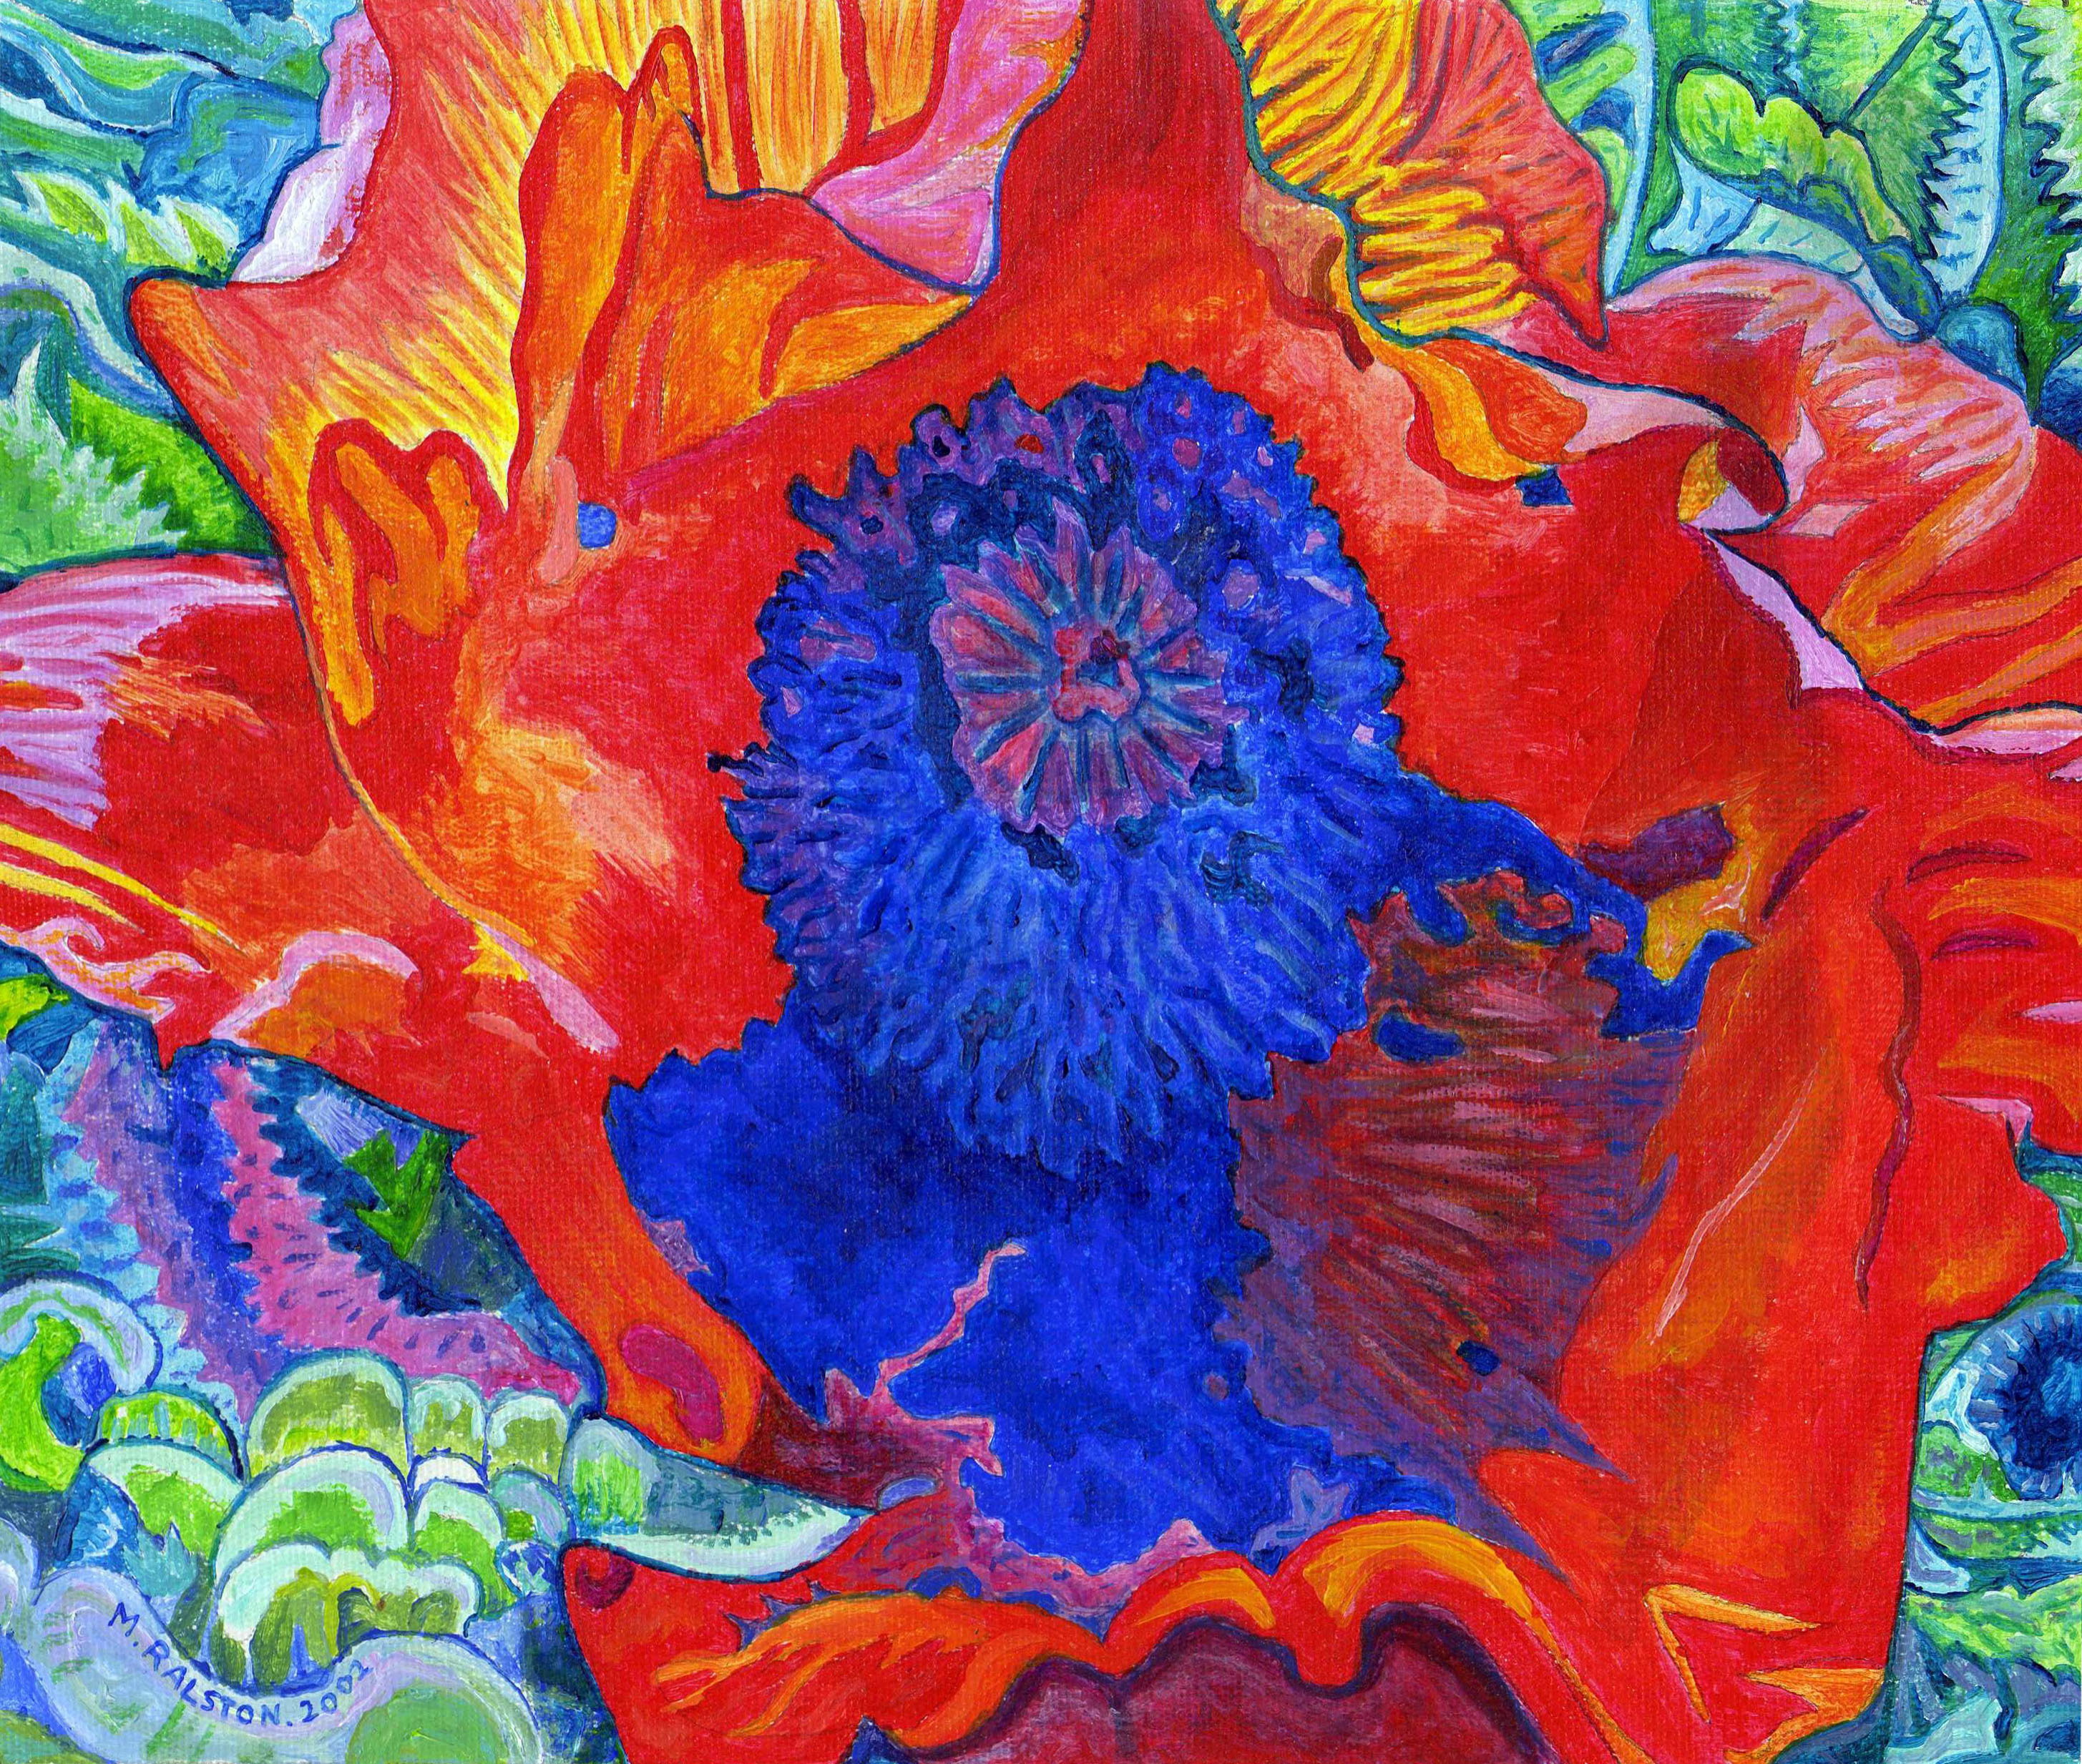 Acrylic painting of a Japanese Poppy by Morgan Ralston